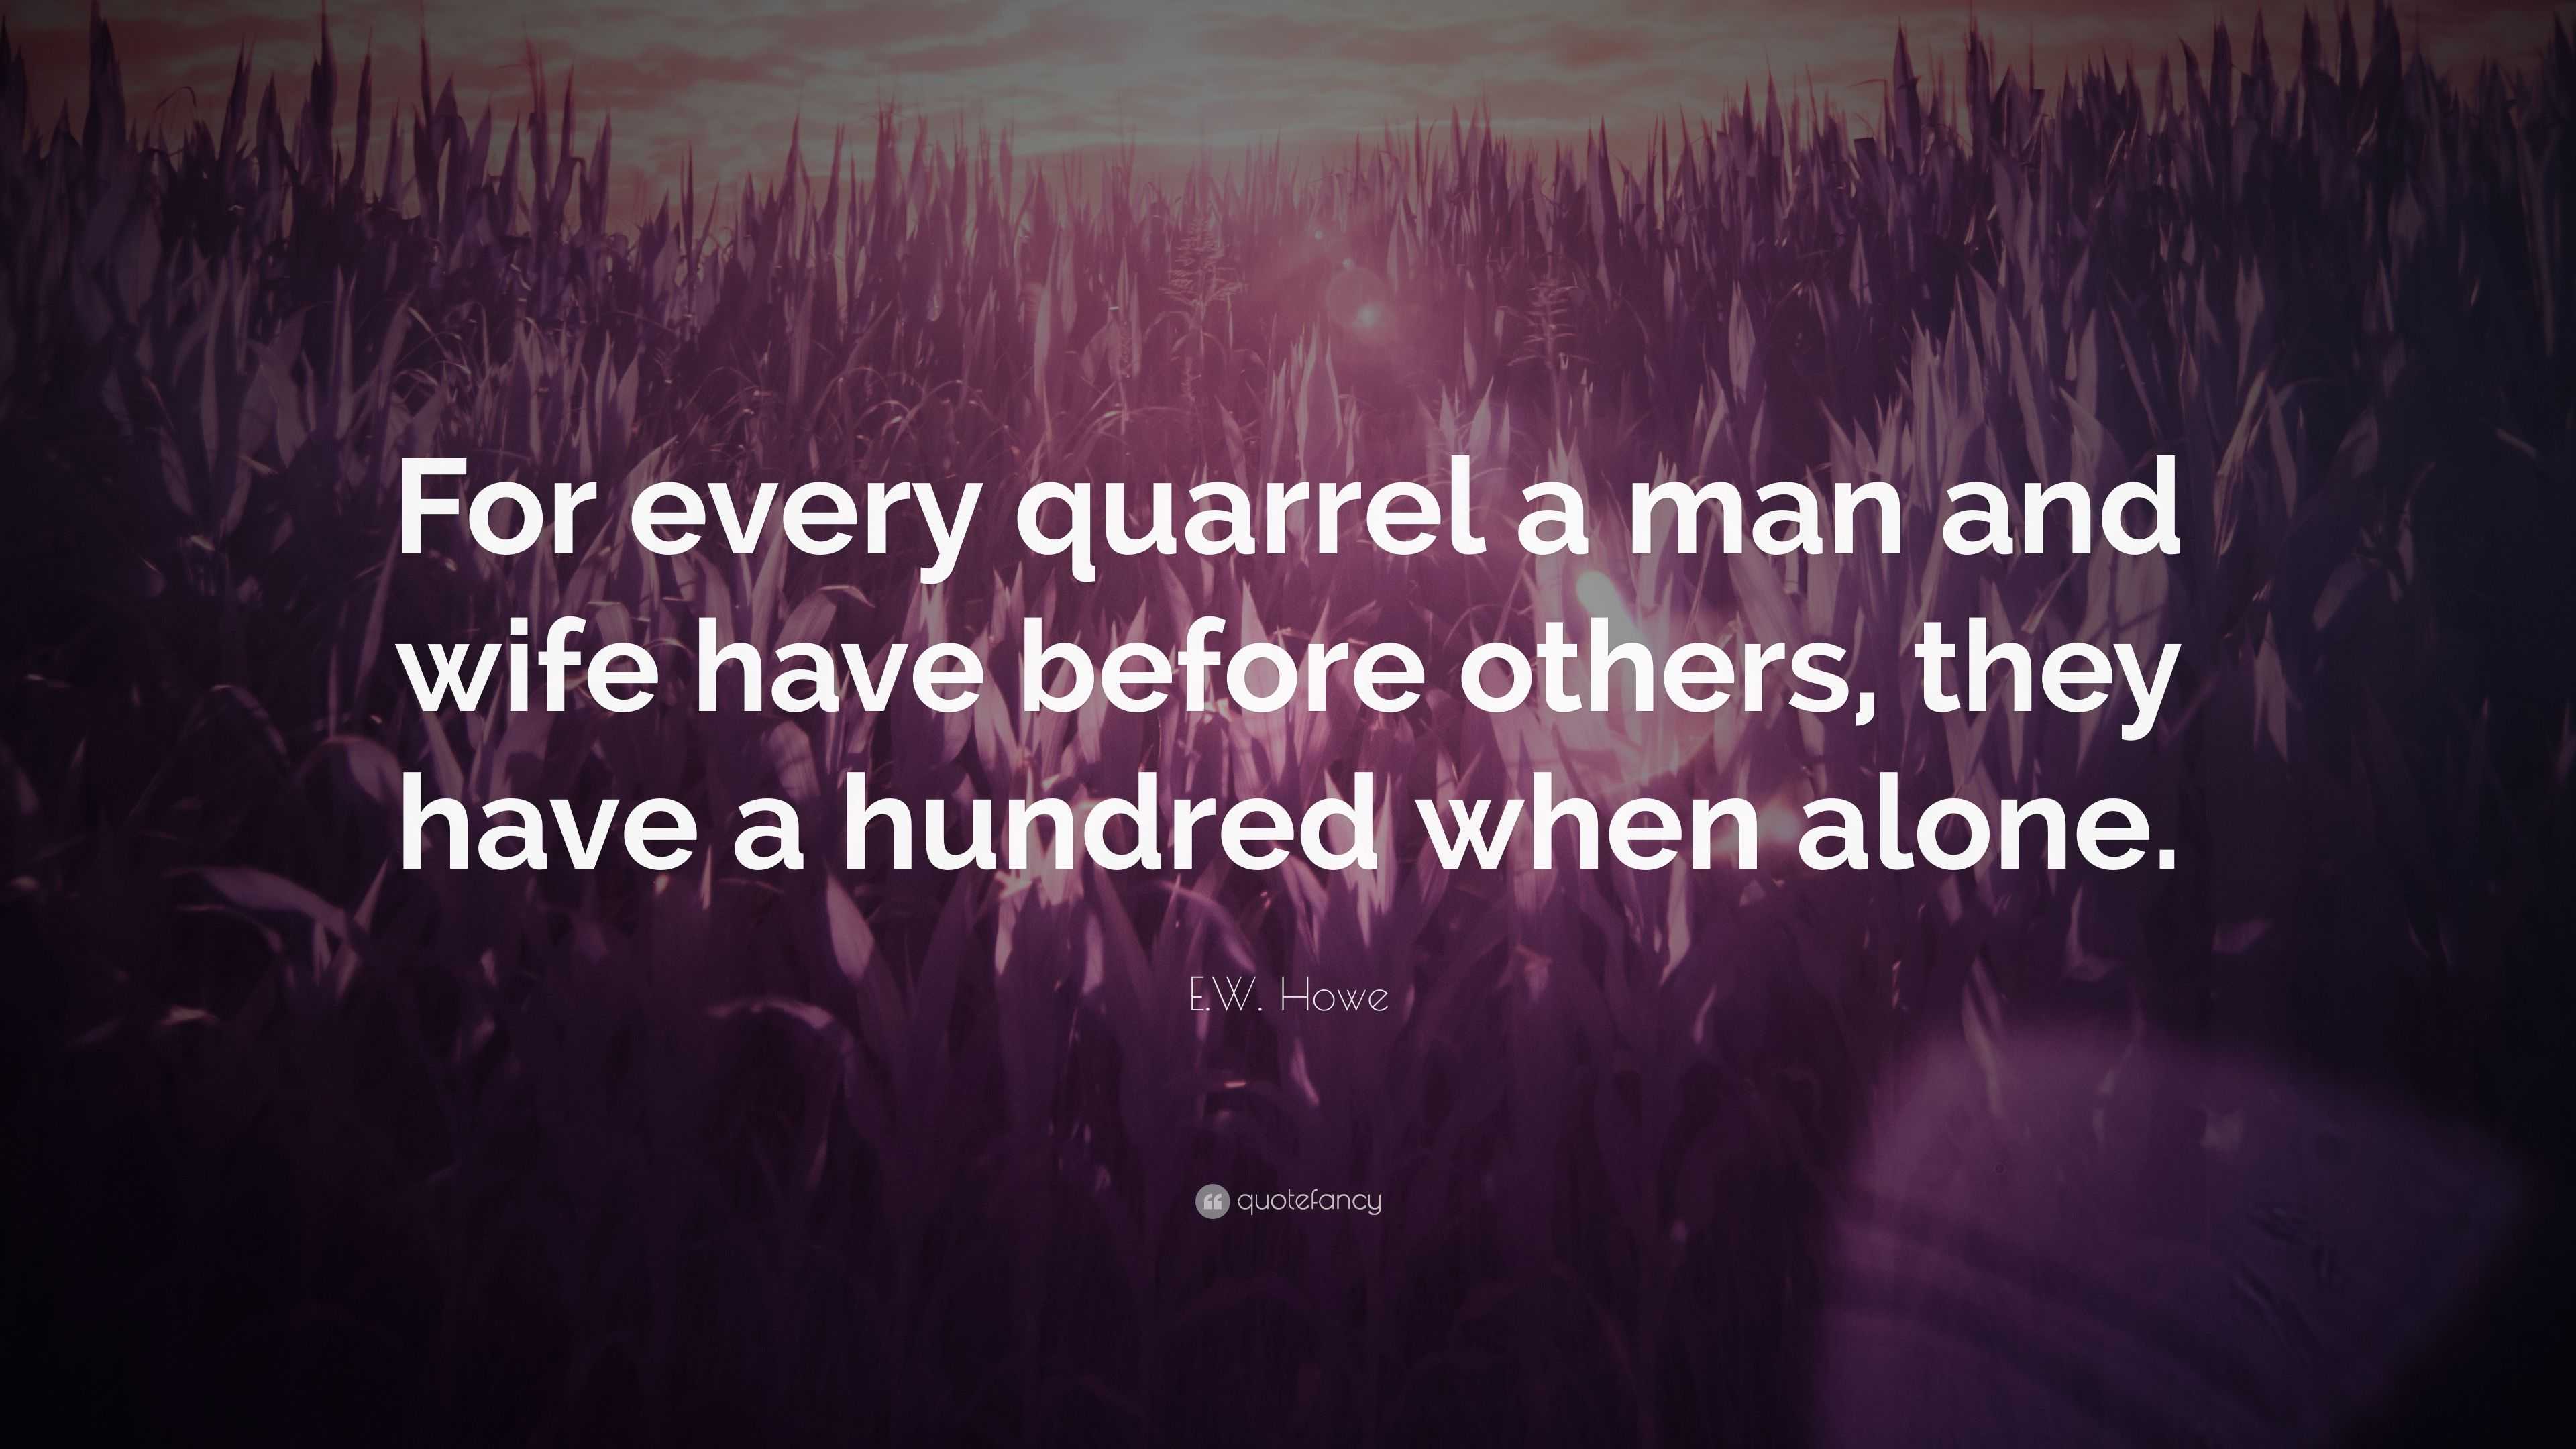 E.W. Howe Quote: “For every quarrel a man and wife have before others ...